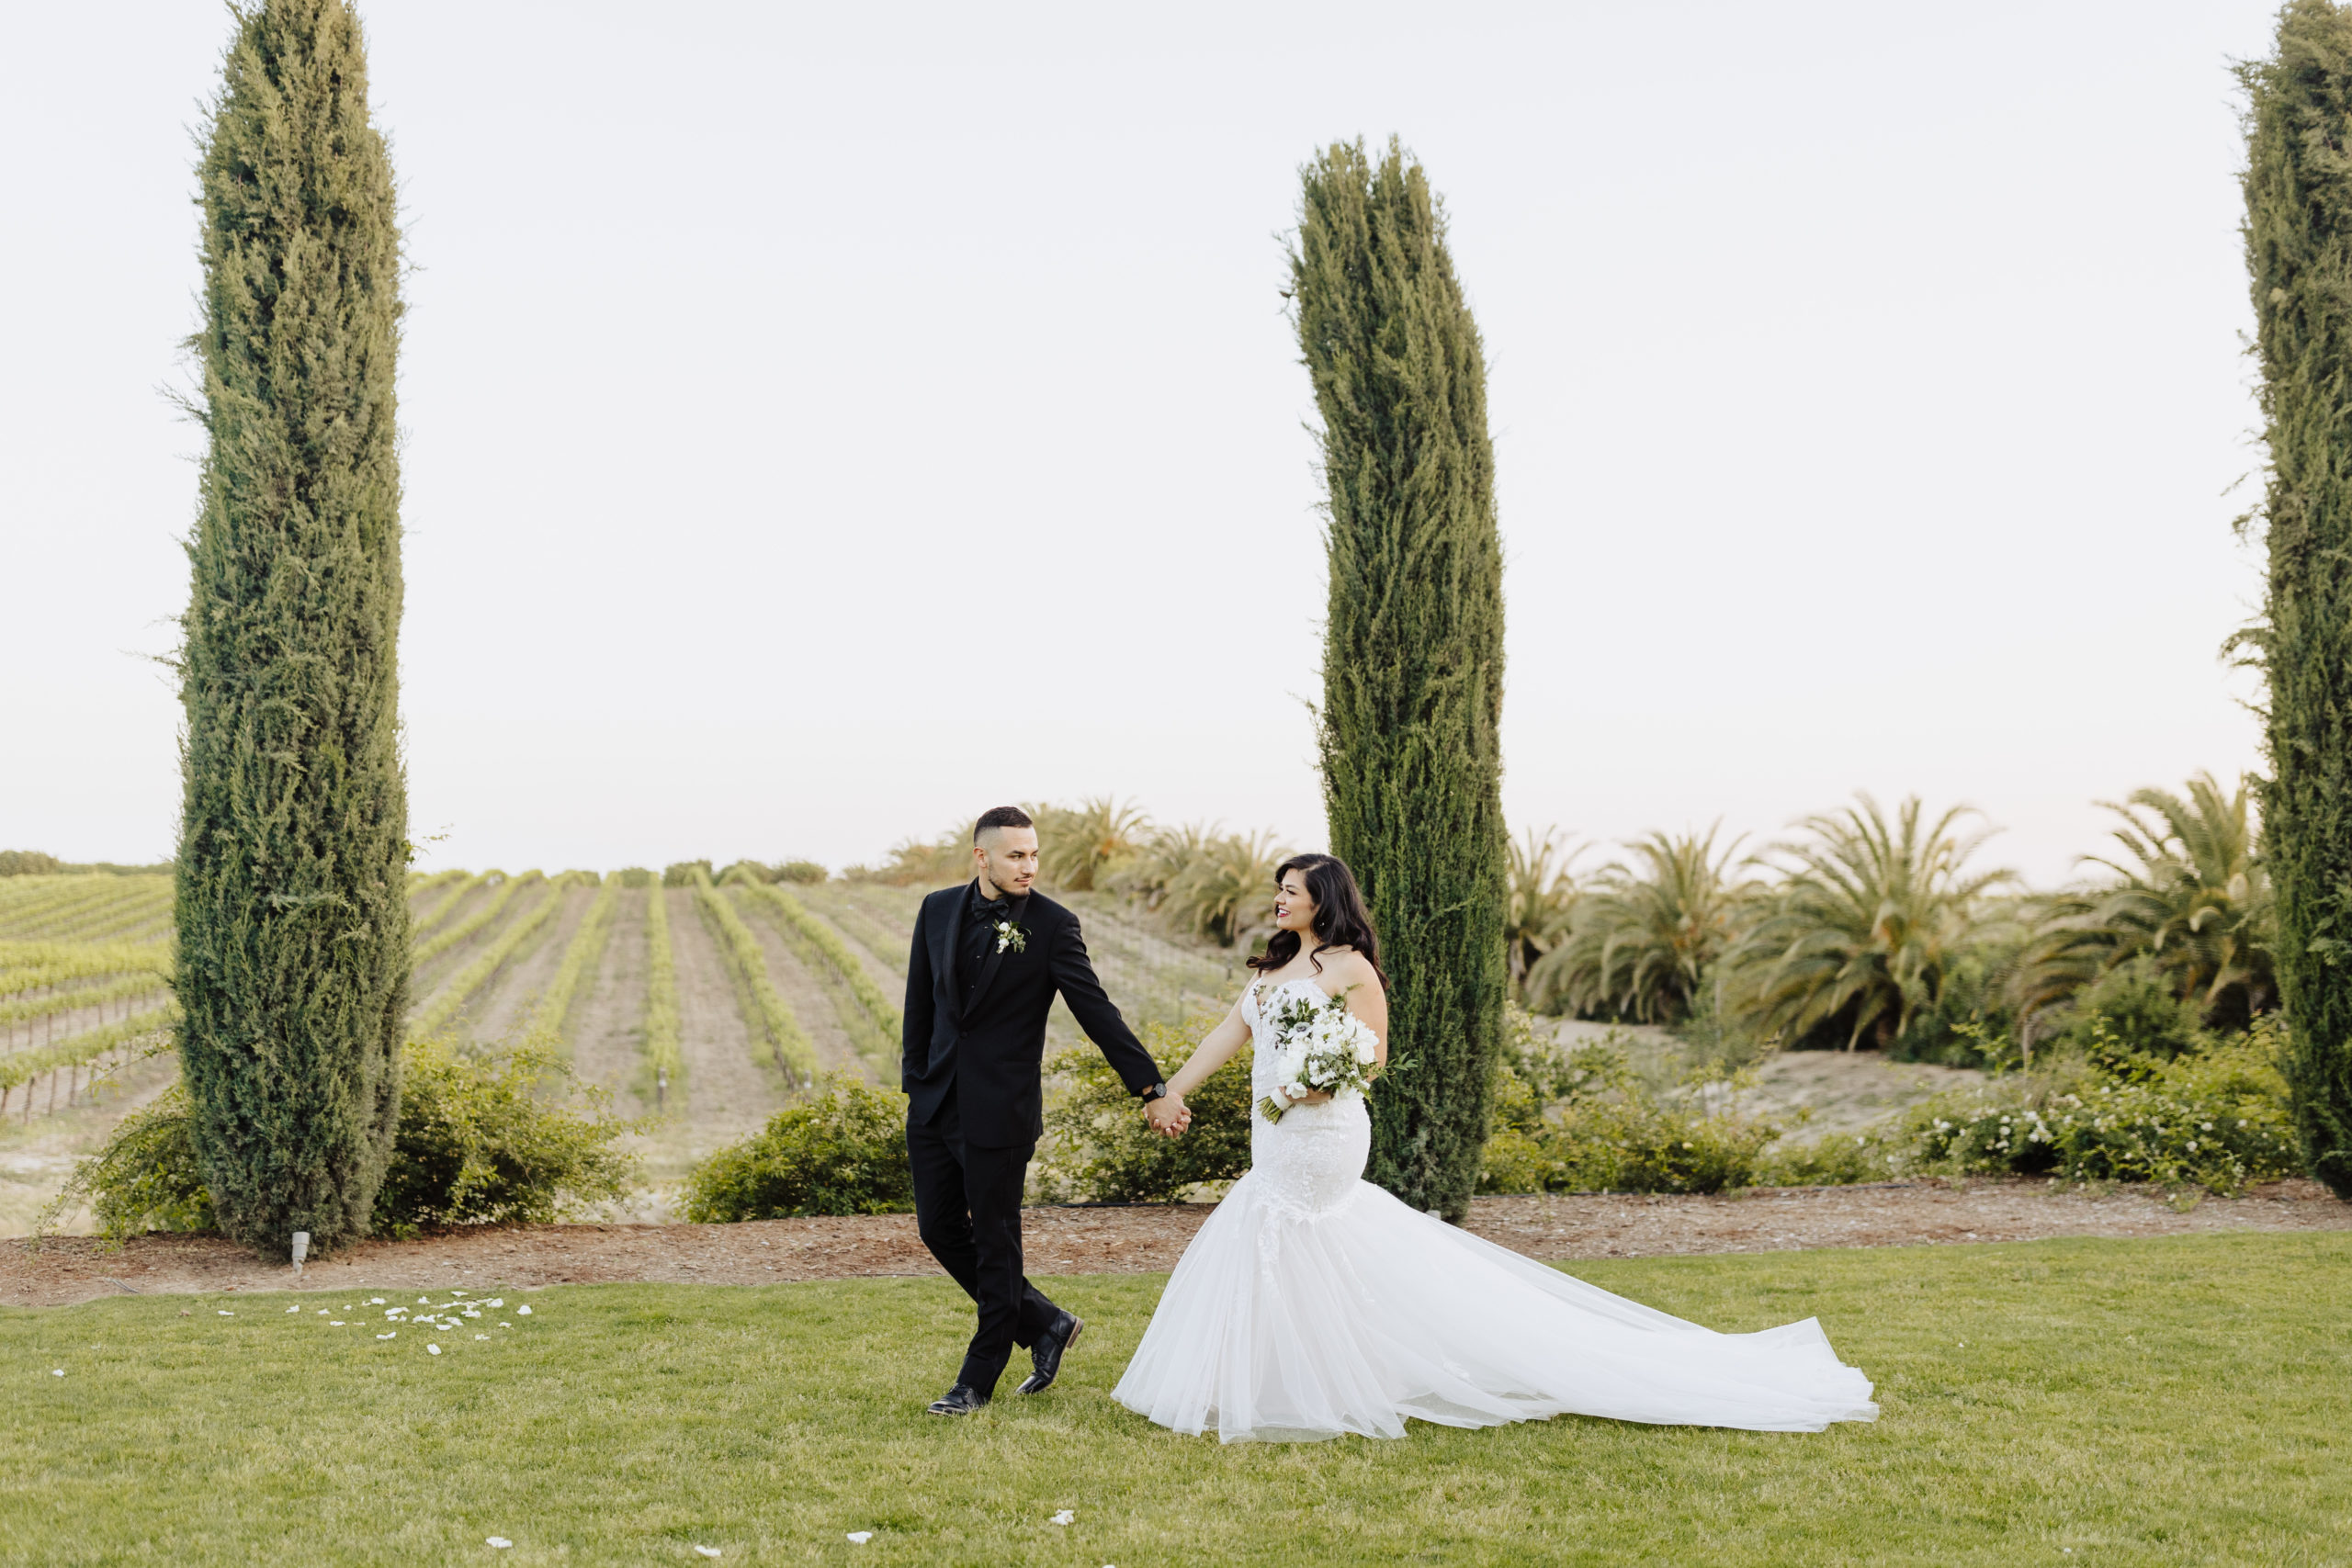 Toca Madera Winery wedding venues in Fresno